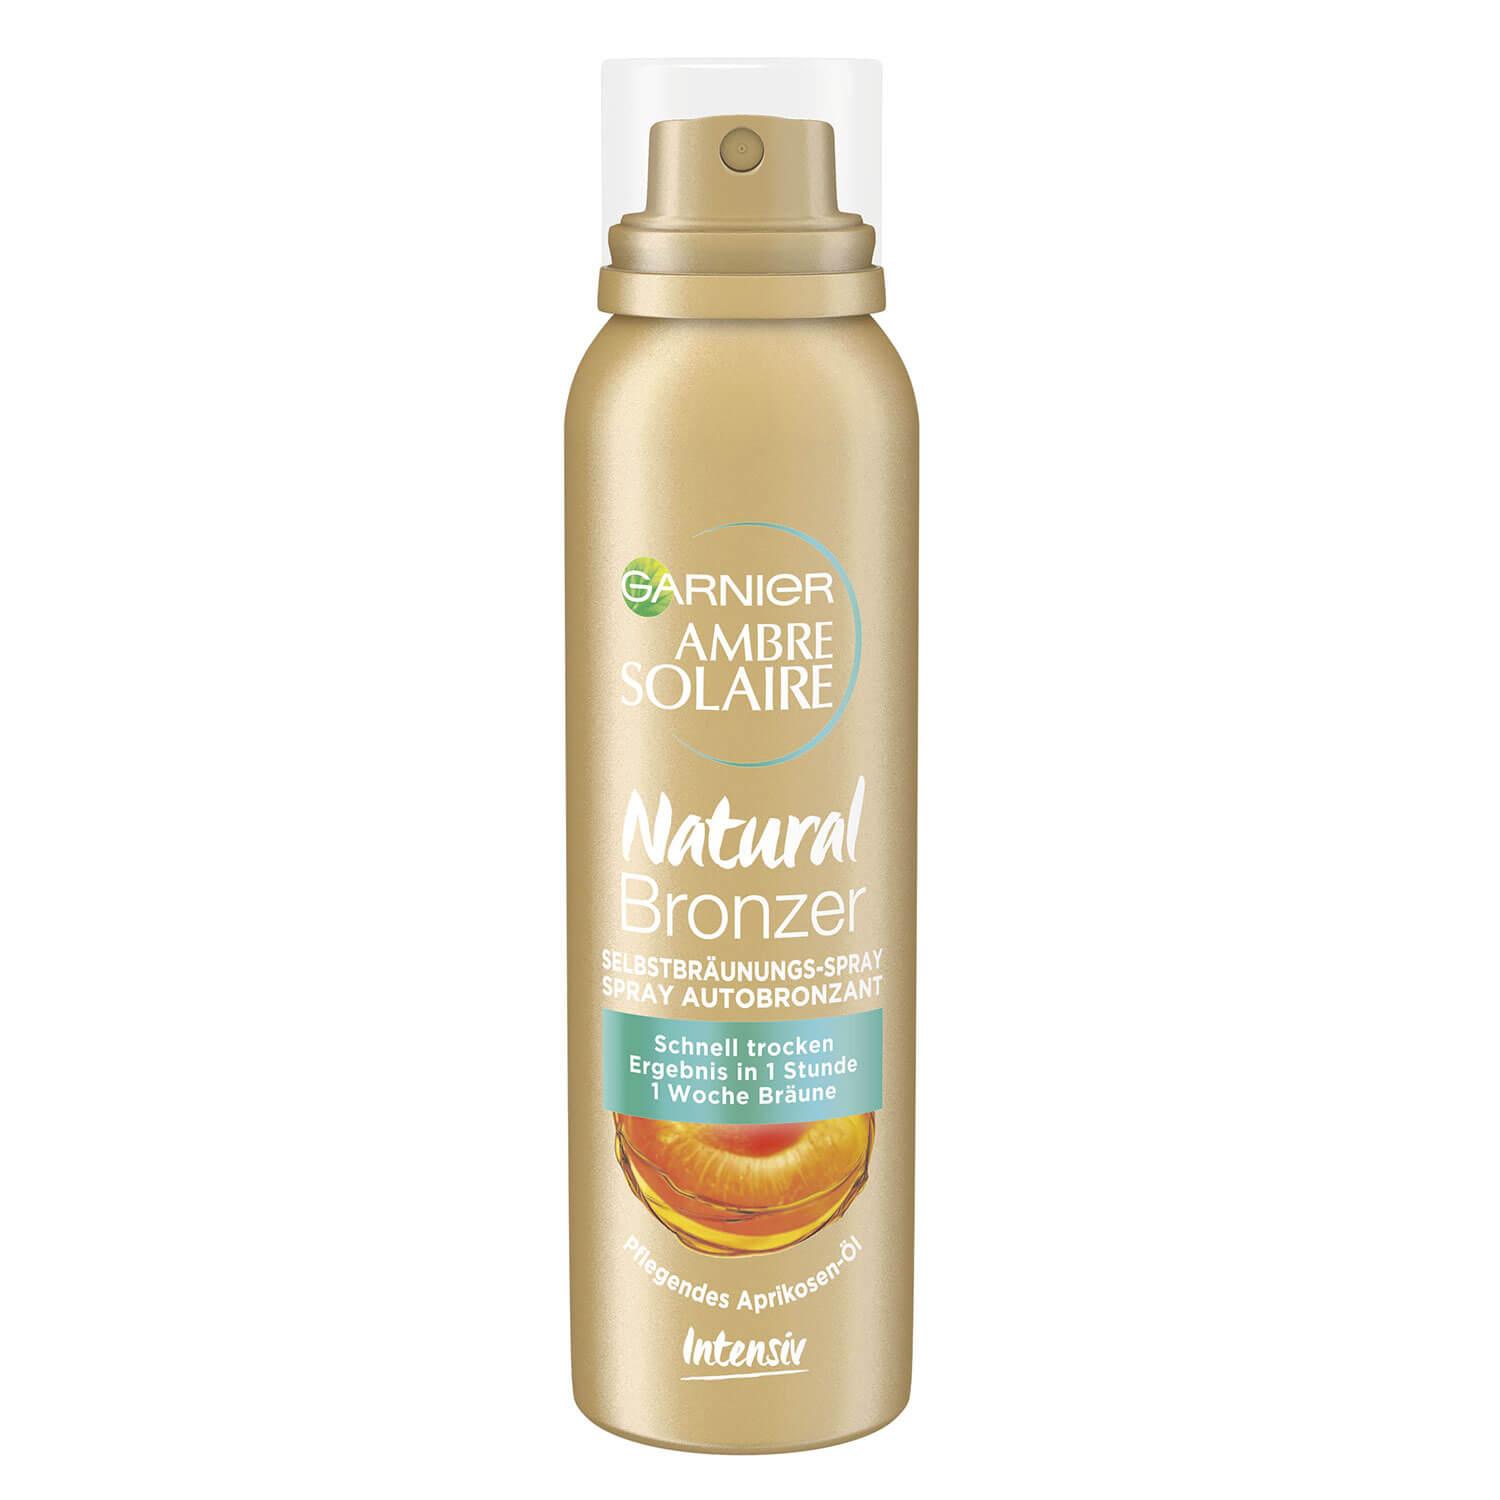 Ambre Solaire - Natural Bronzer Self Tanning Spray